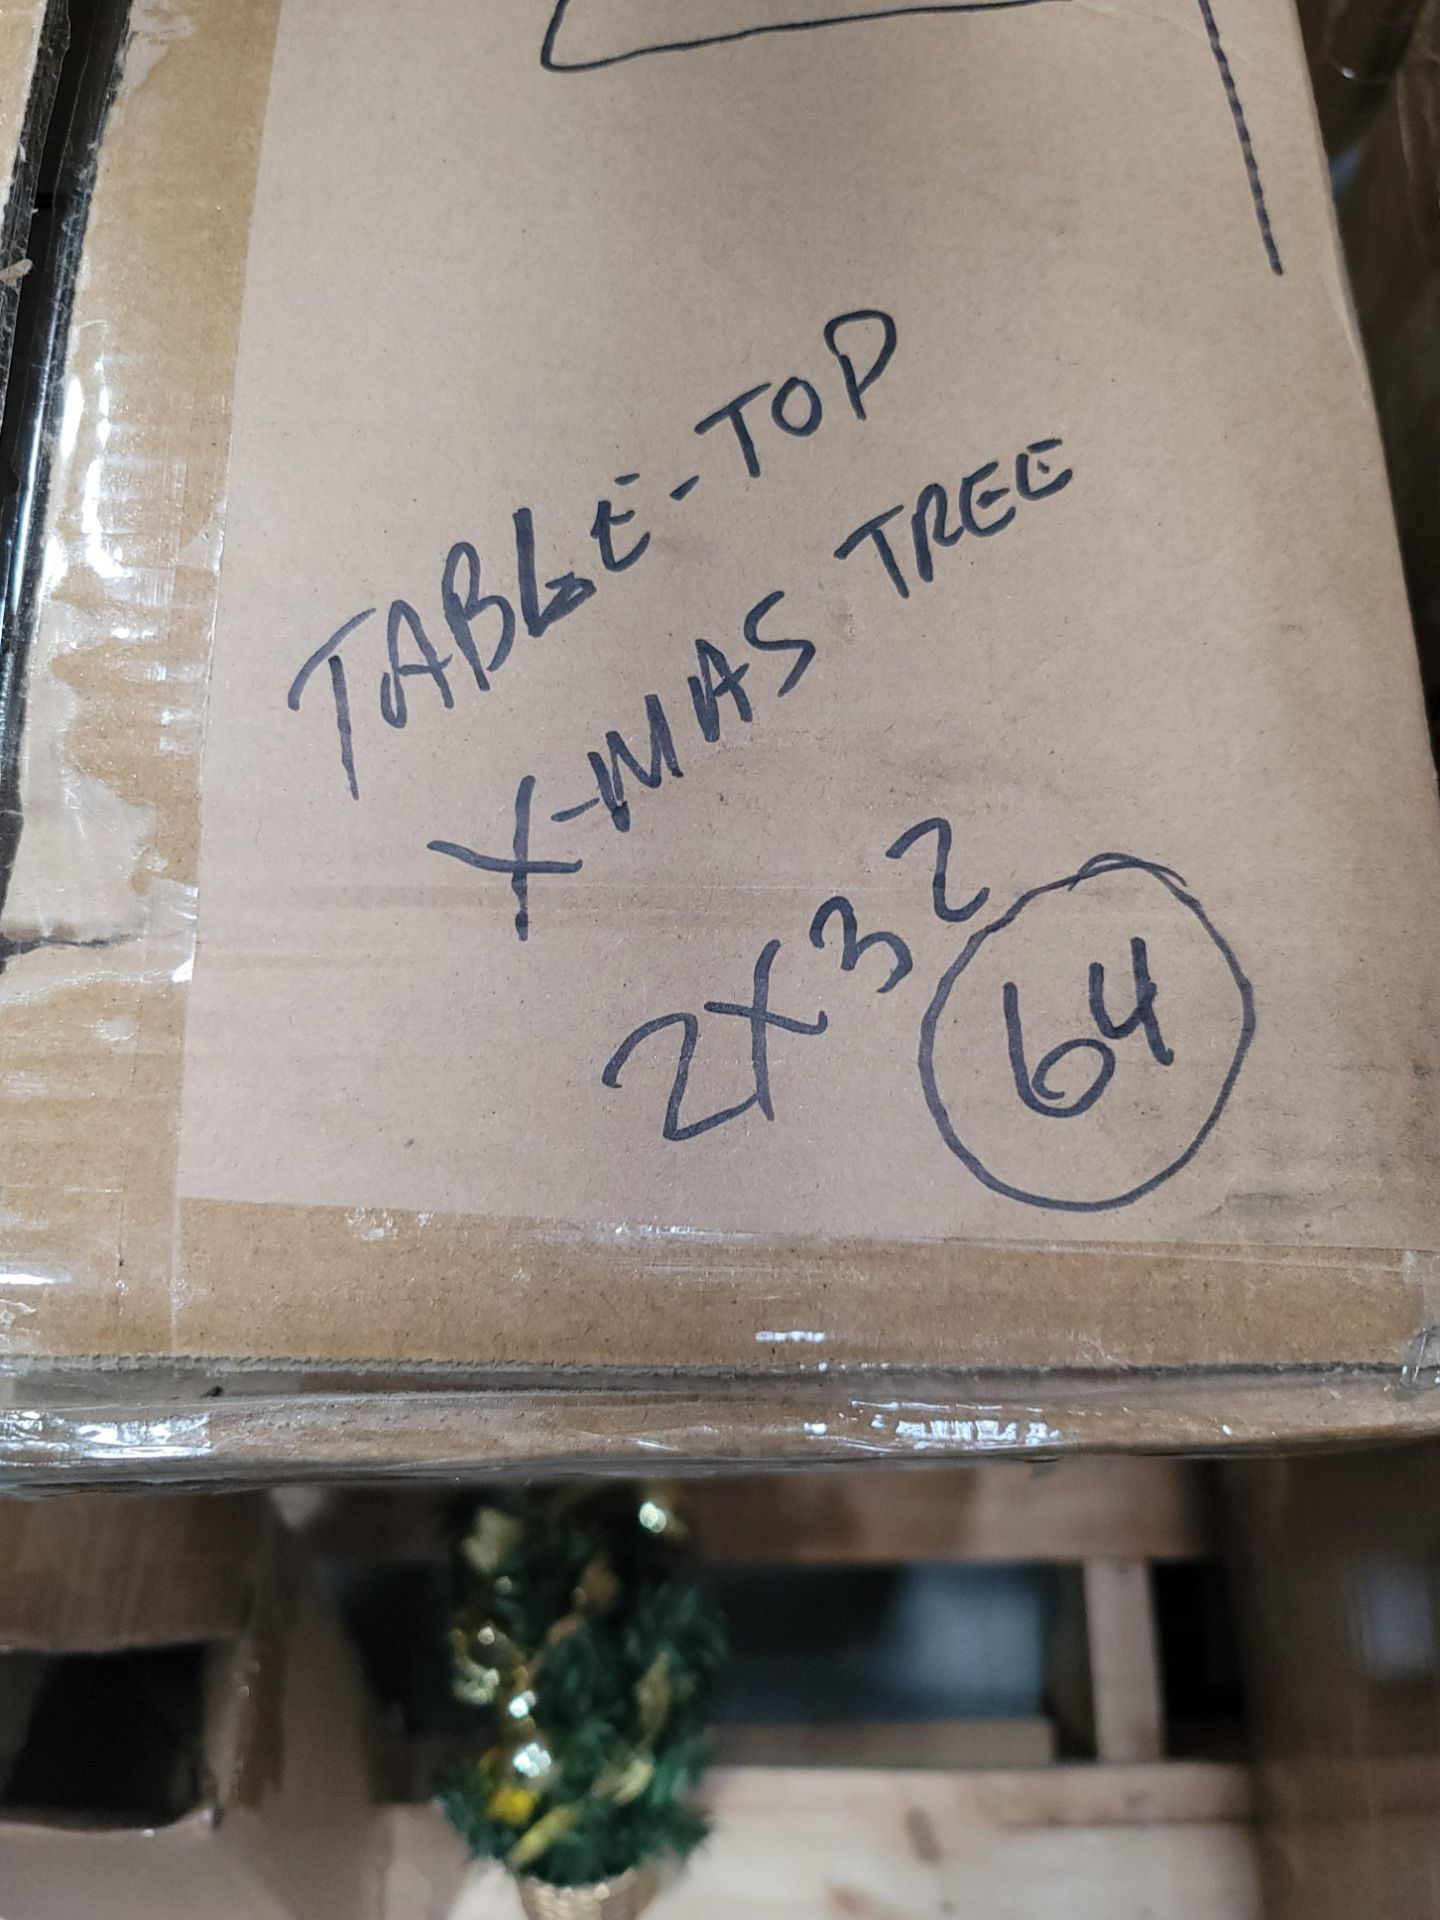 LOT - (64) TABLE TOP CHRISTMAS TREE, (2 CASES/32 PER CASE) - Image 2 of 4